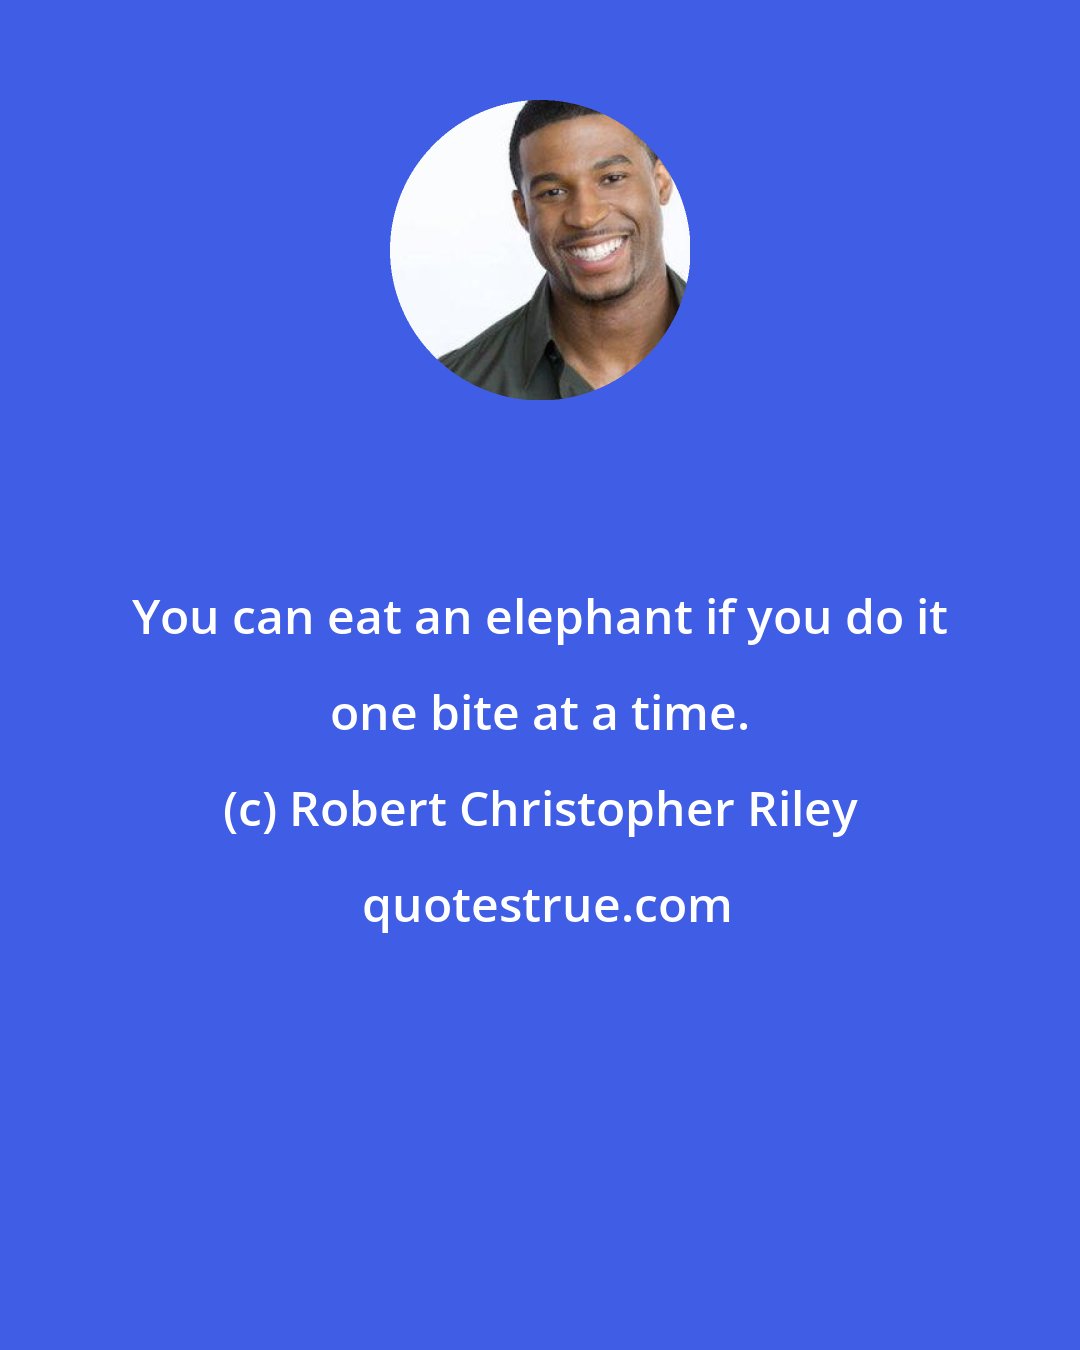 Robert Christopher Riley: You can eat an elephant if you do it one bite at a time.